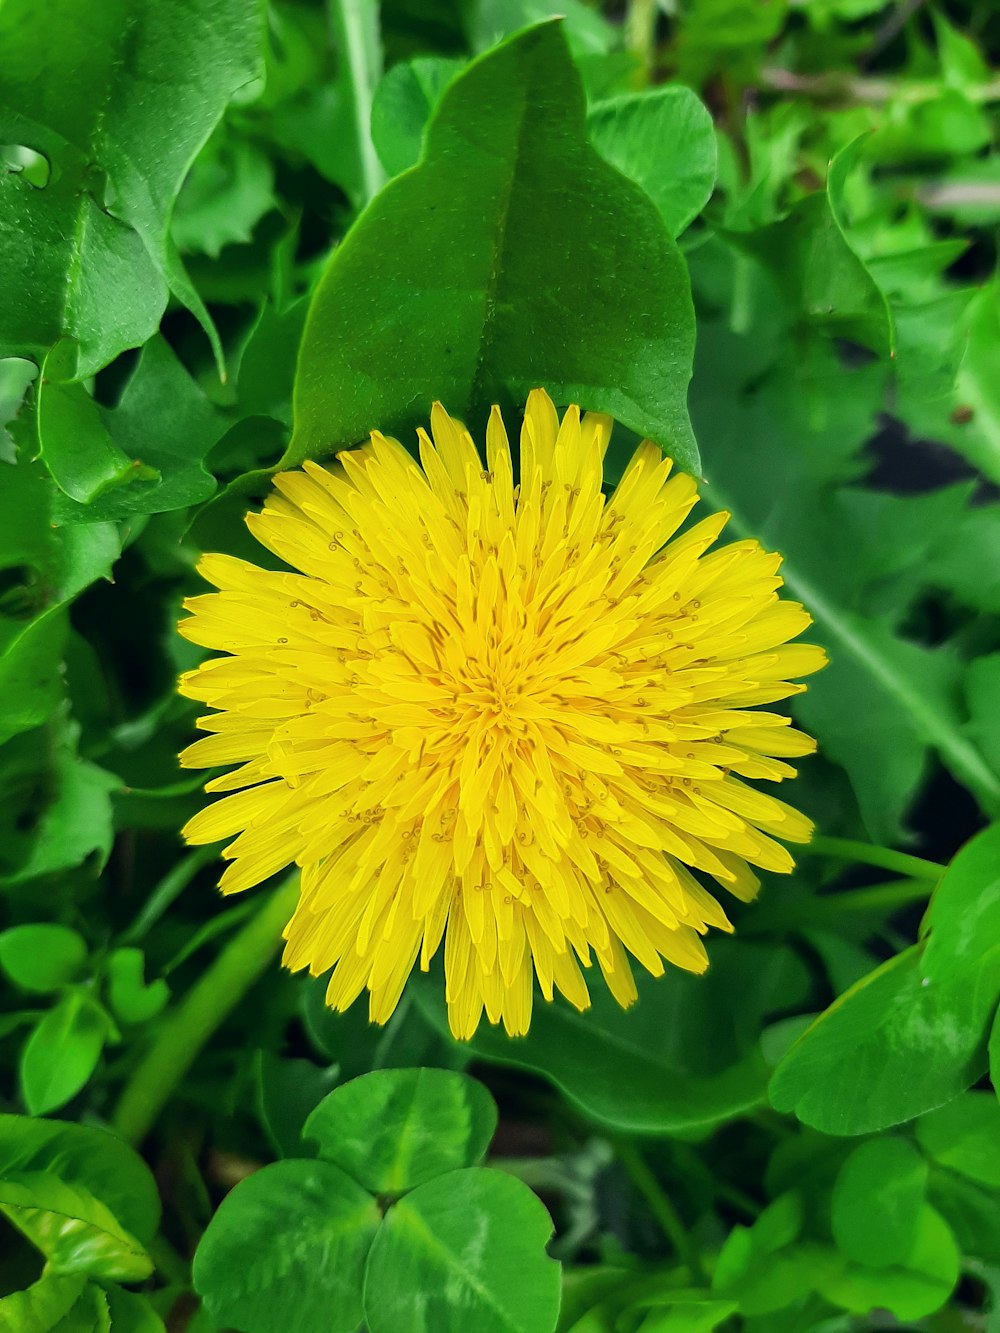 a close up of a yellow flower surrounded by green leaves